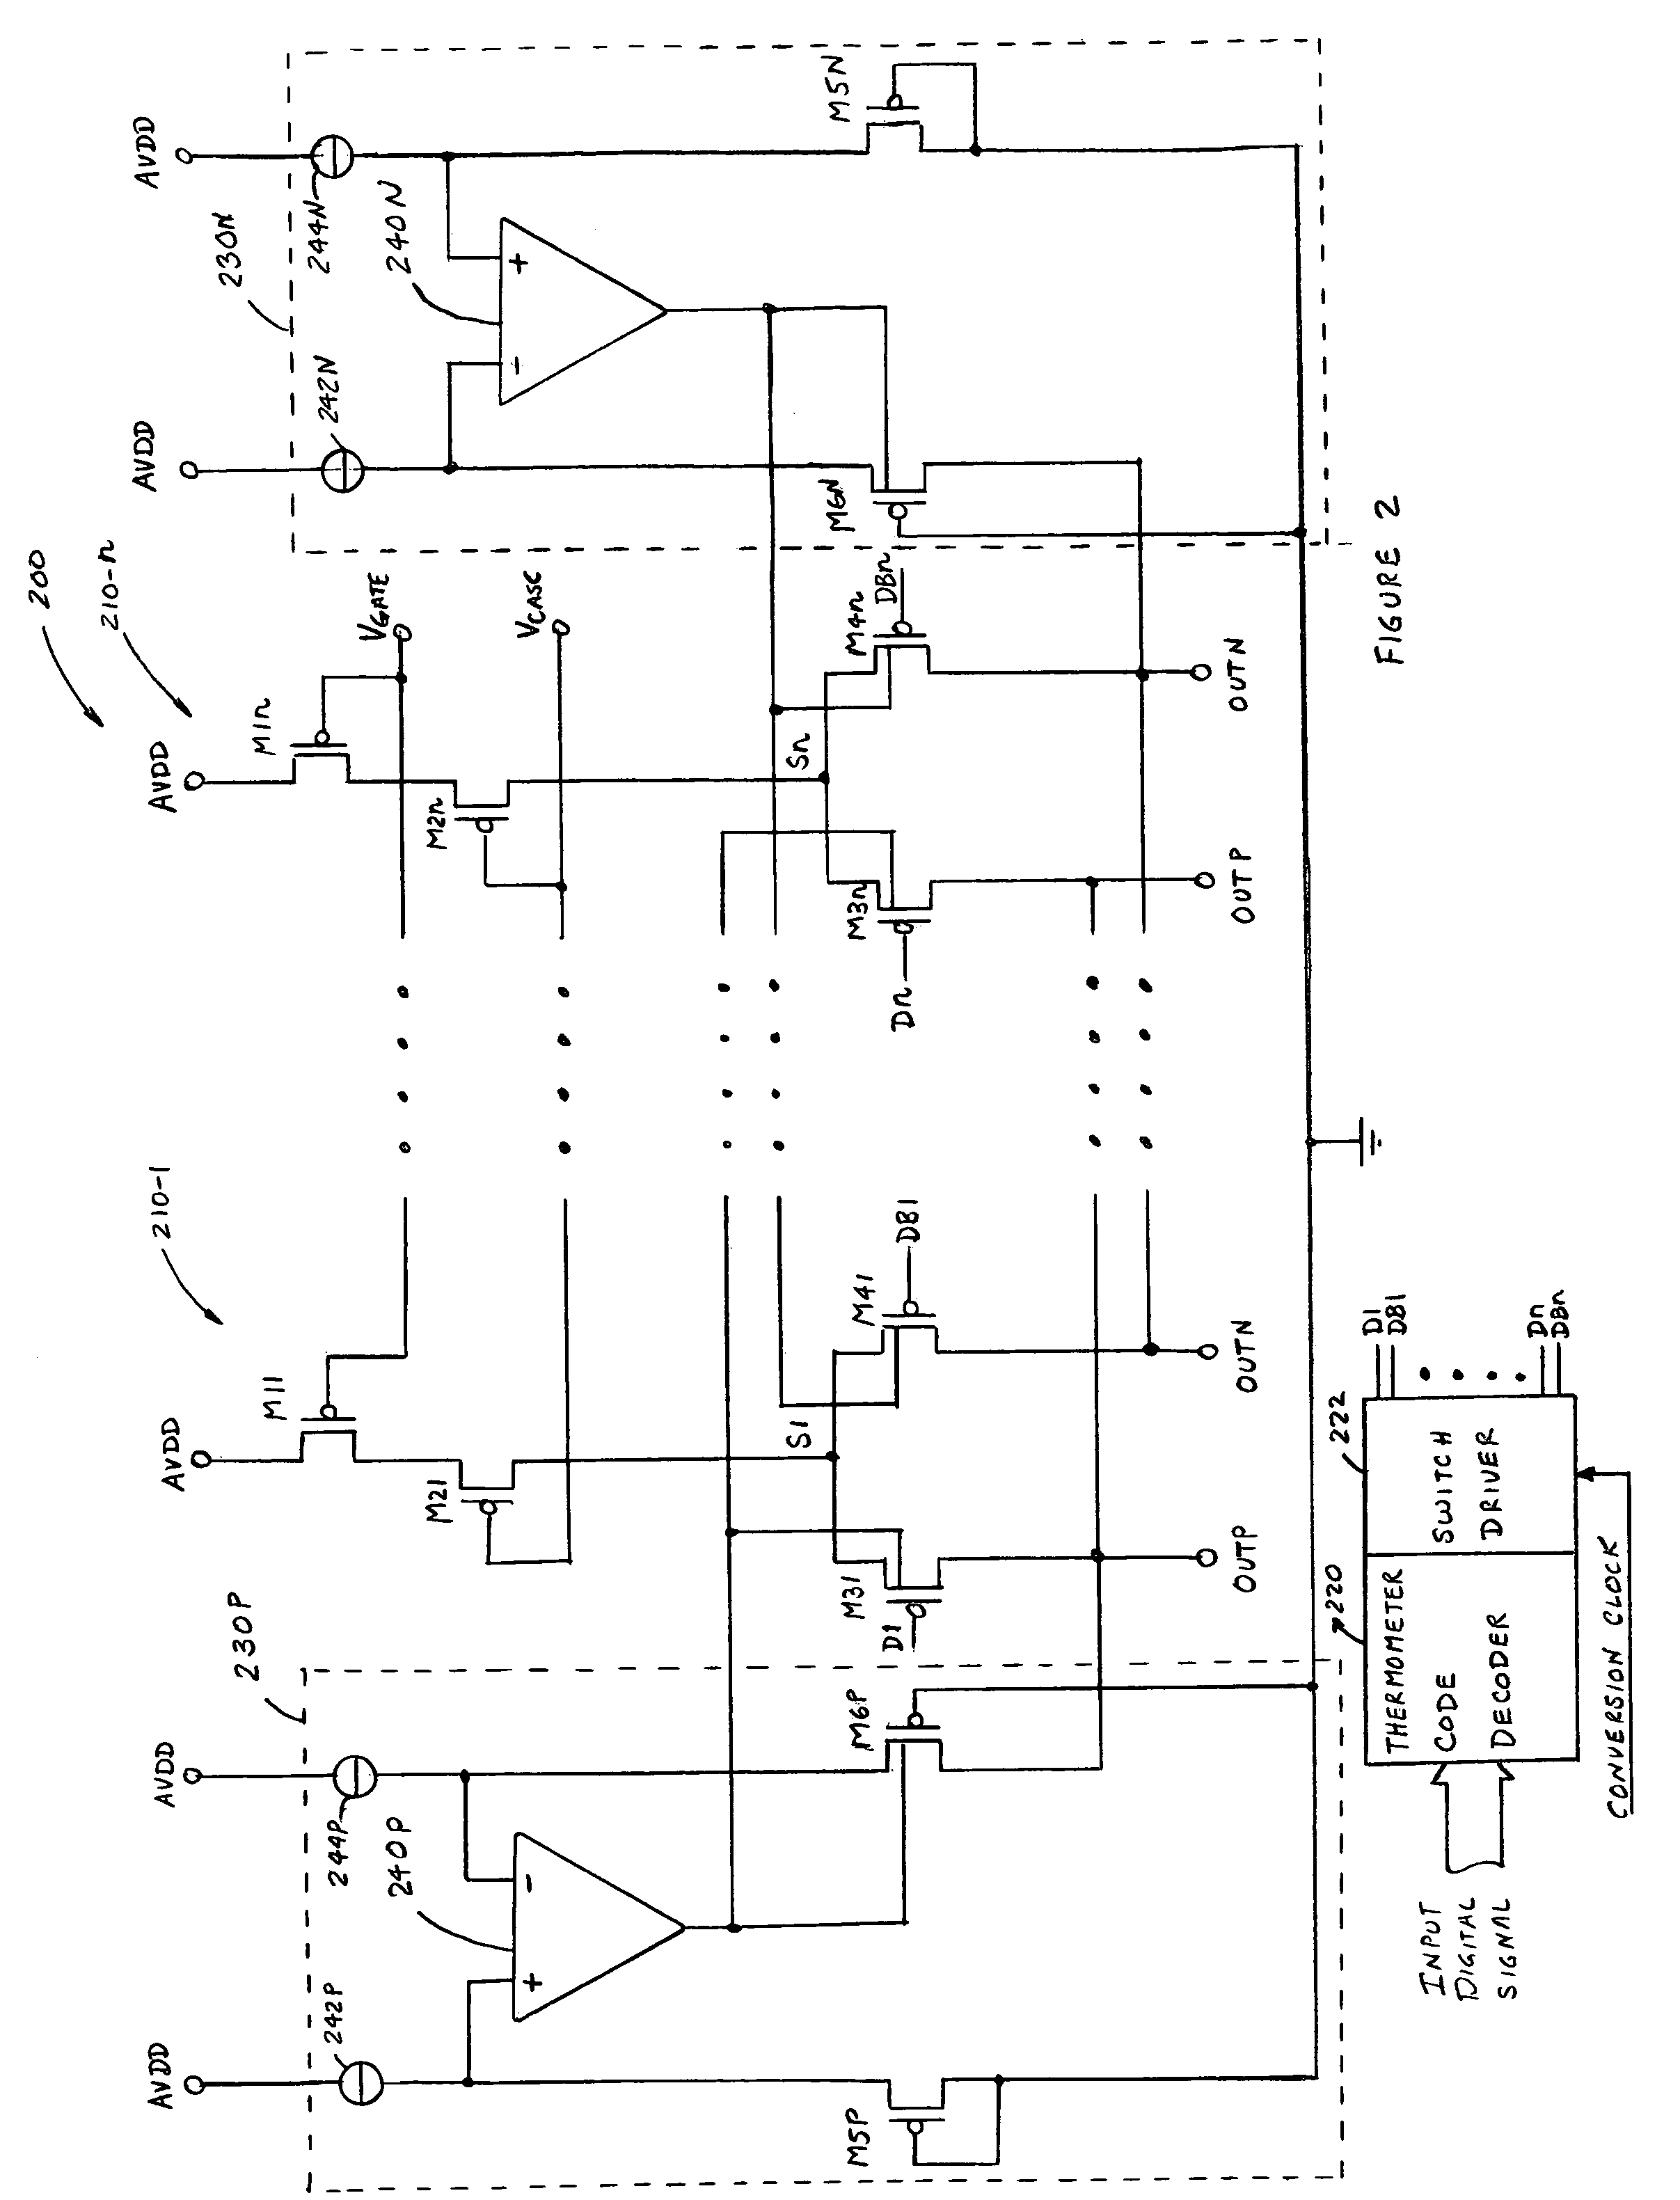 Current steering digital-to-analog (DAC) converter with improved dynamic performance